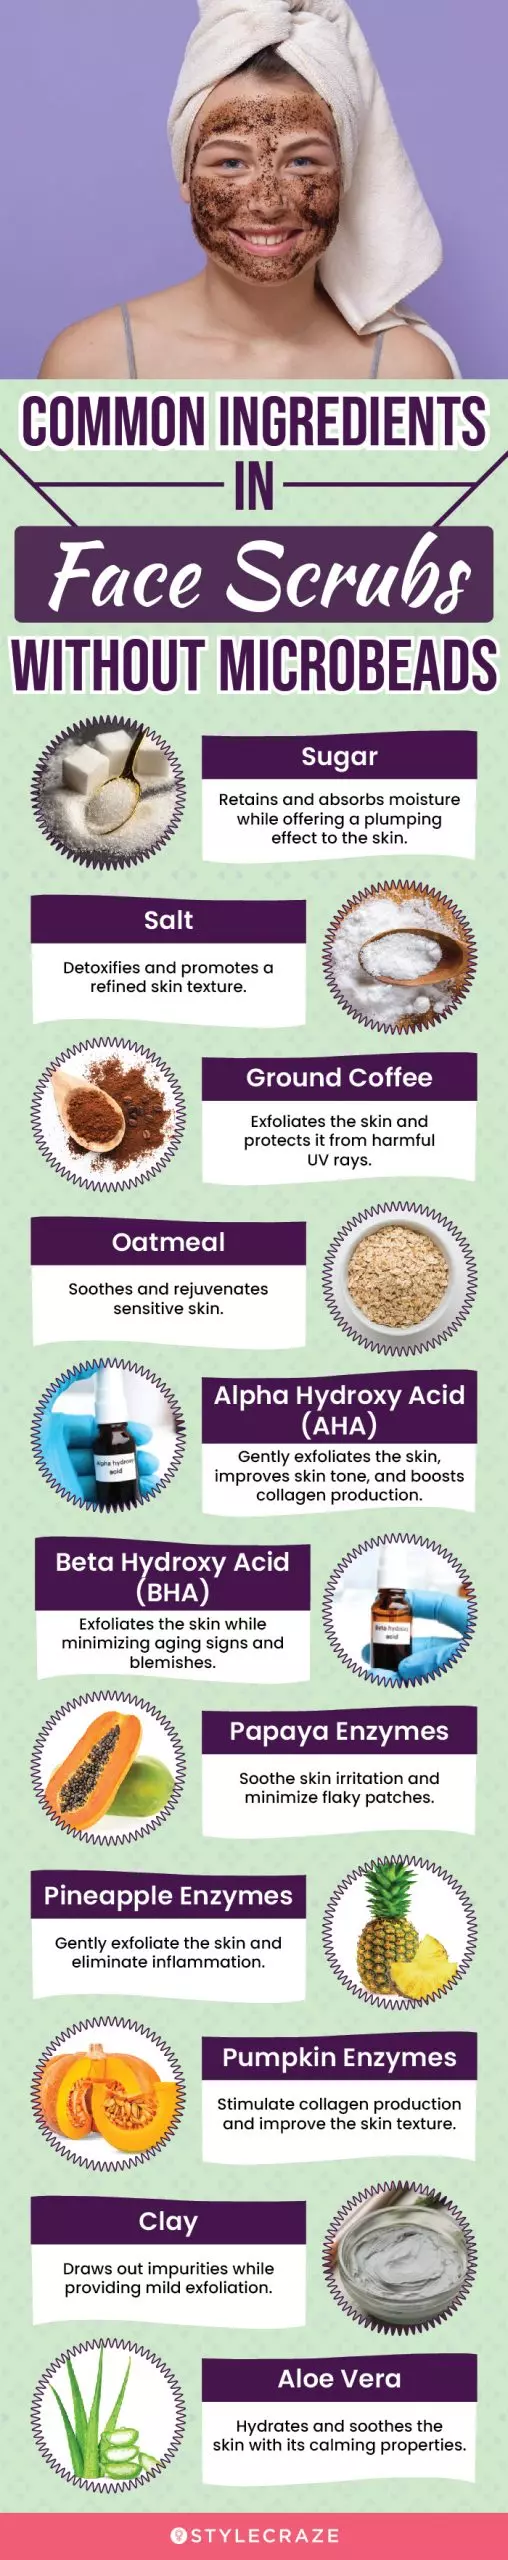 Common Ingredients In Face Scrubs Without Microbeads (infographic)